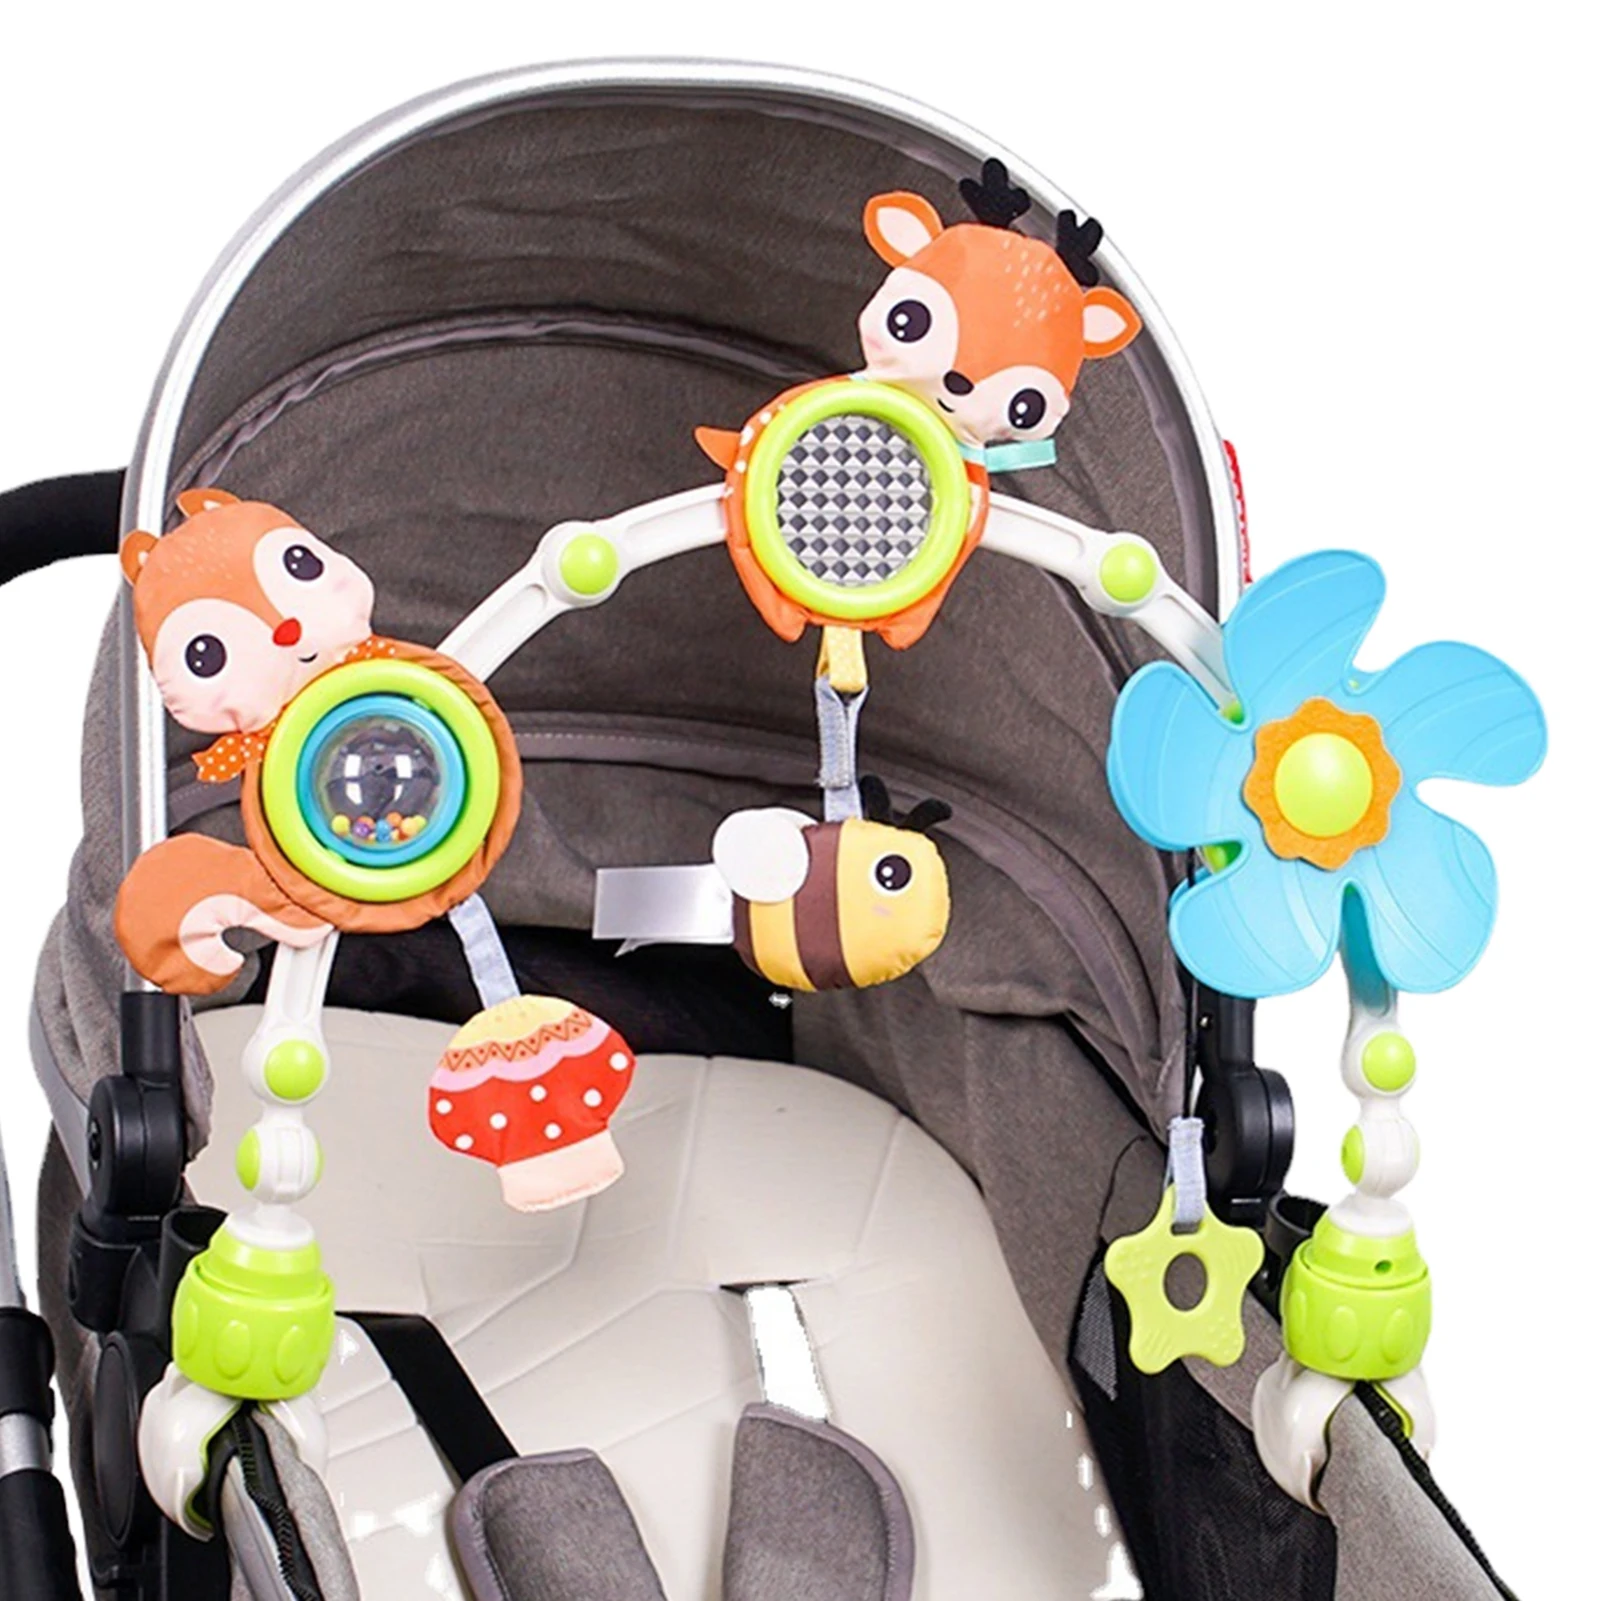 

Stroller Toys Stroller Arch Clip On Crib Carseat Toys Baby Toys 6 To 12 Months Animal Theme Arch-Shaped Cute Stroller Newborn To